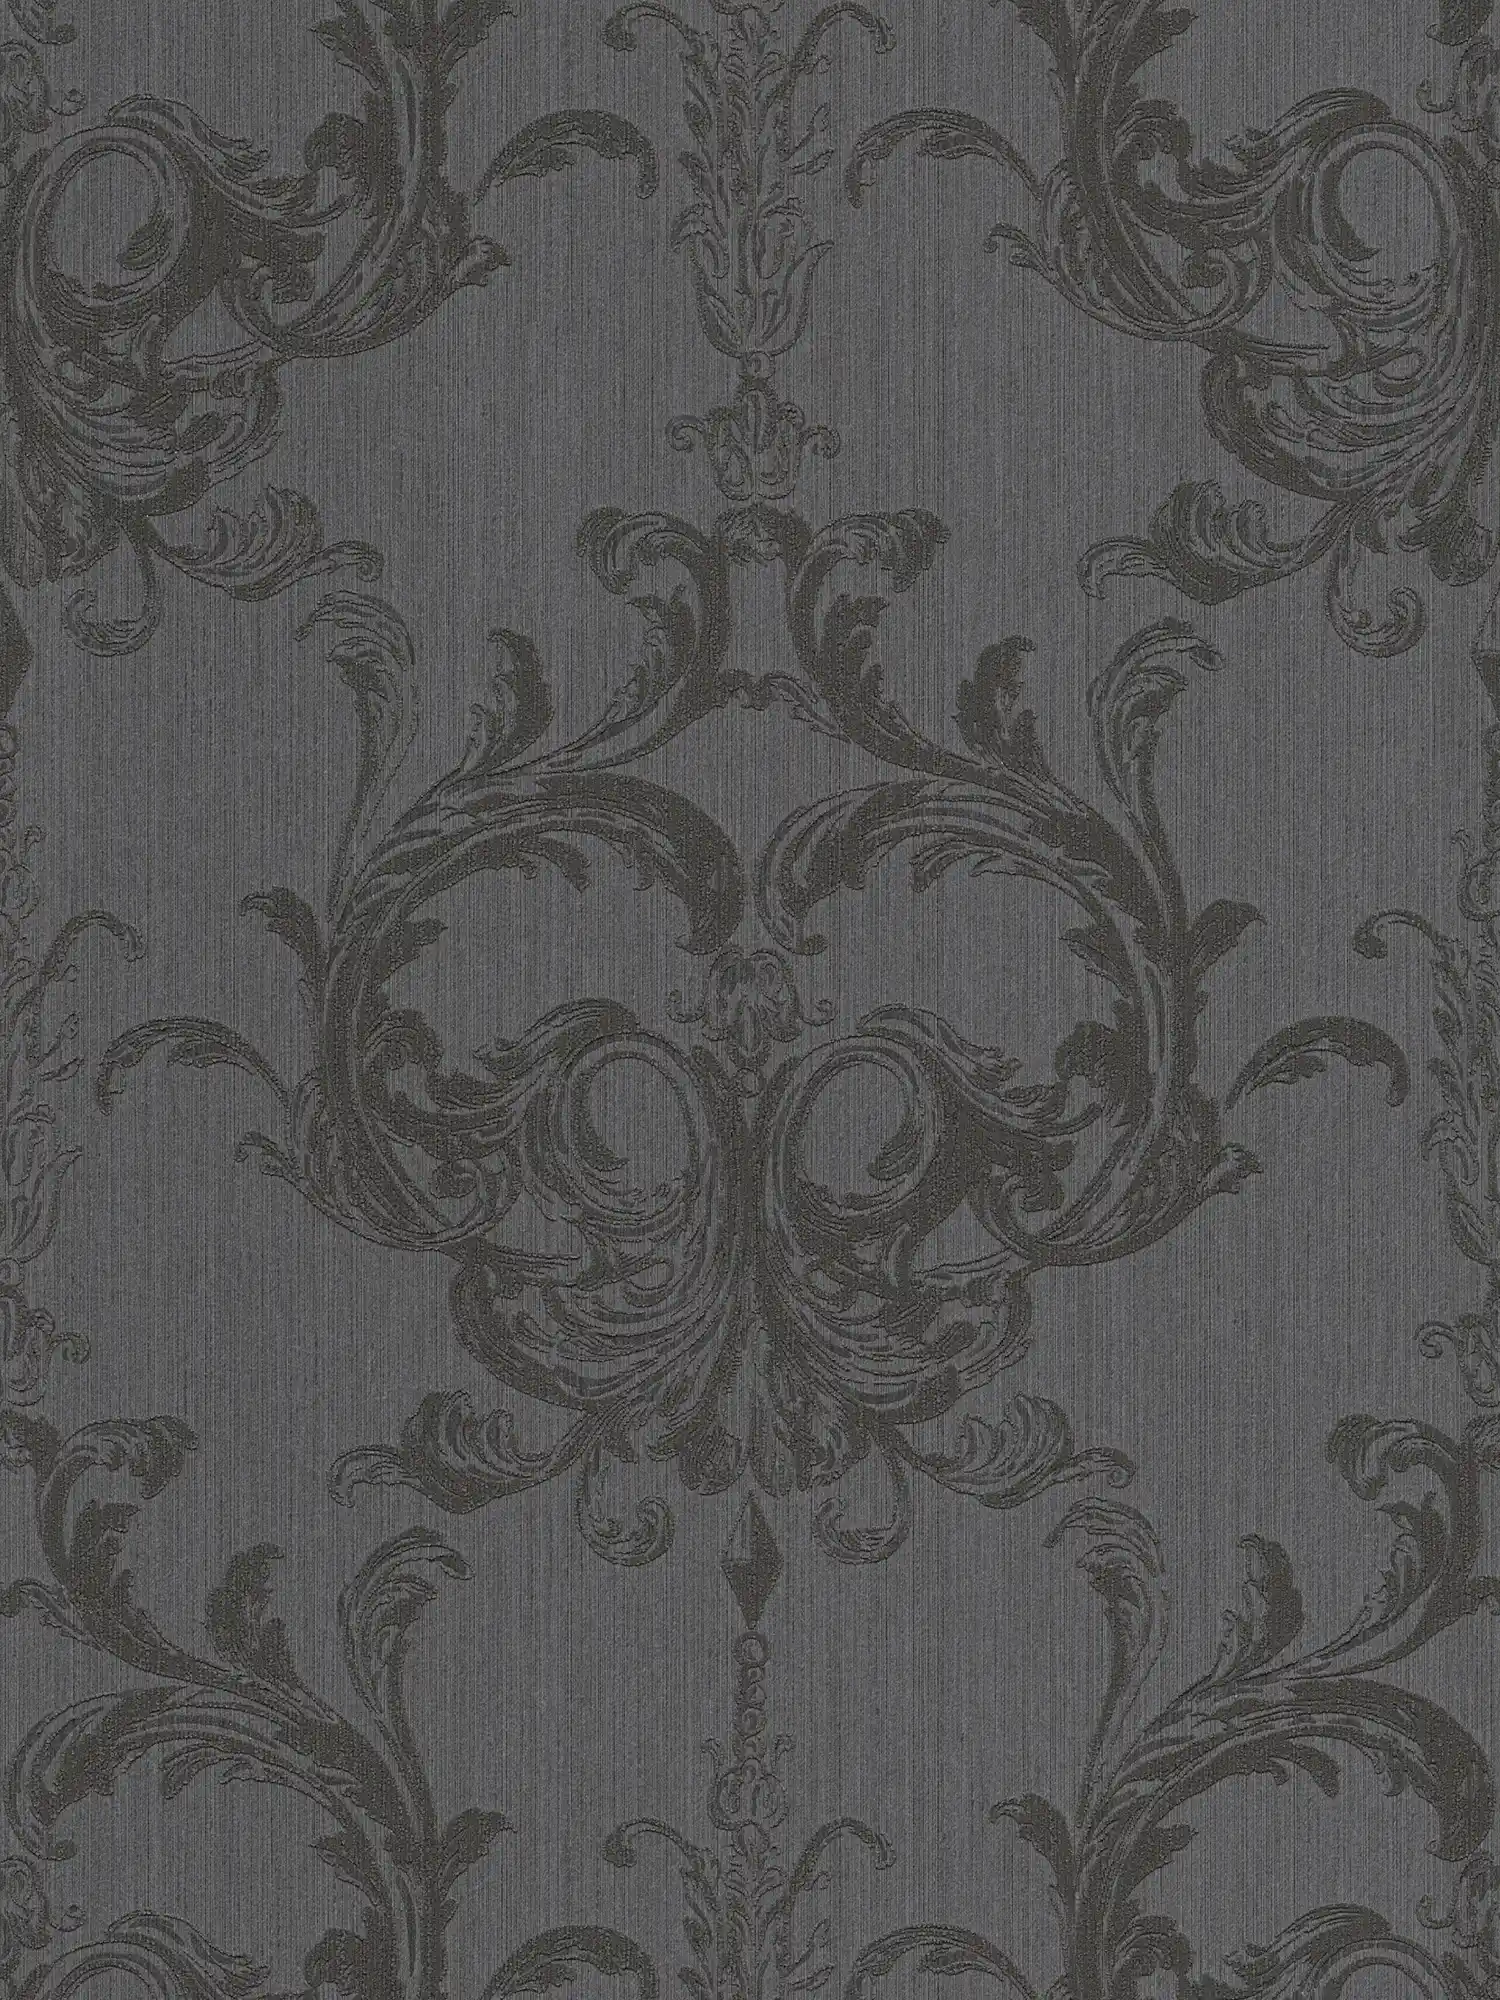 Ornament wallpaper detailed with textured pattern - brown
